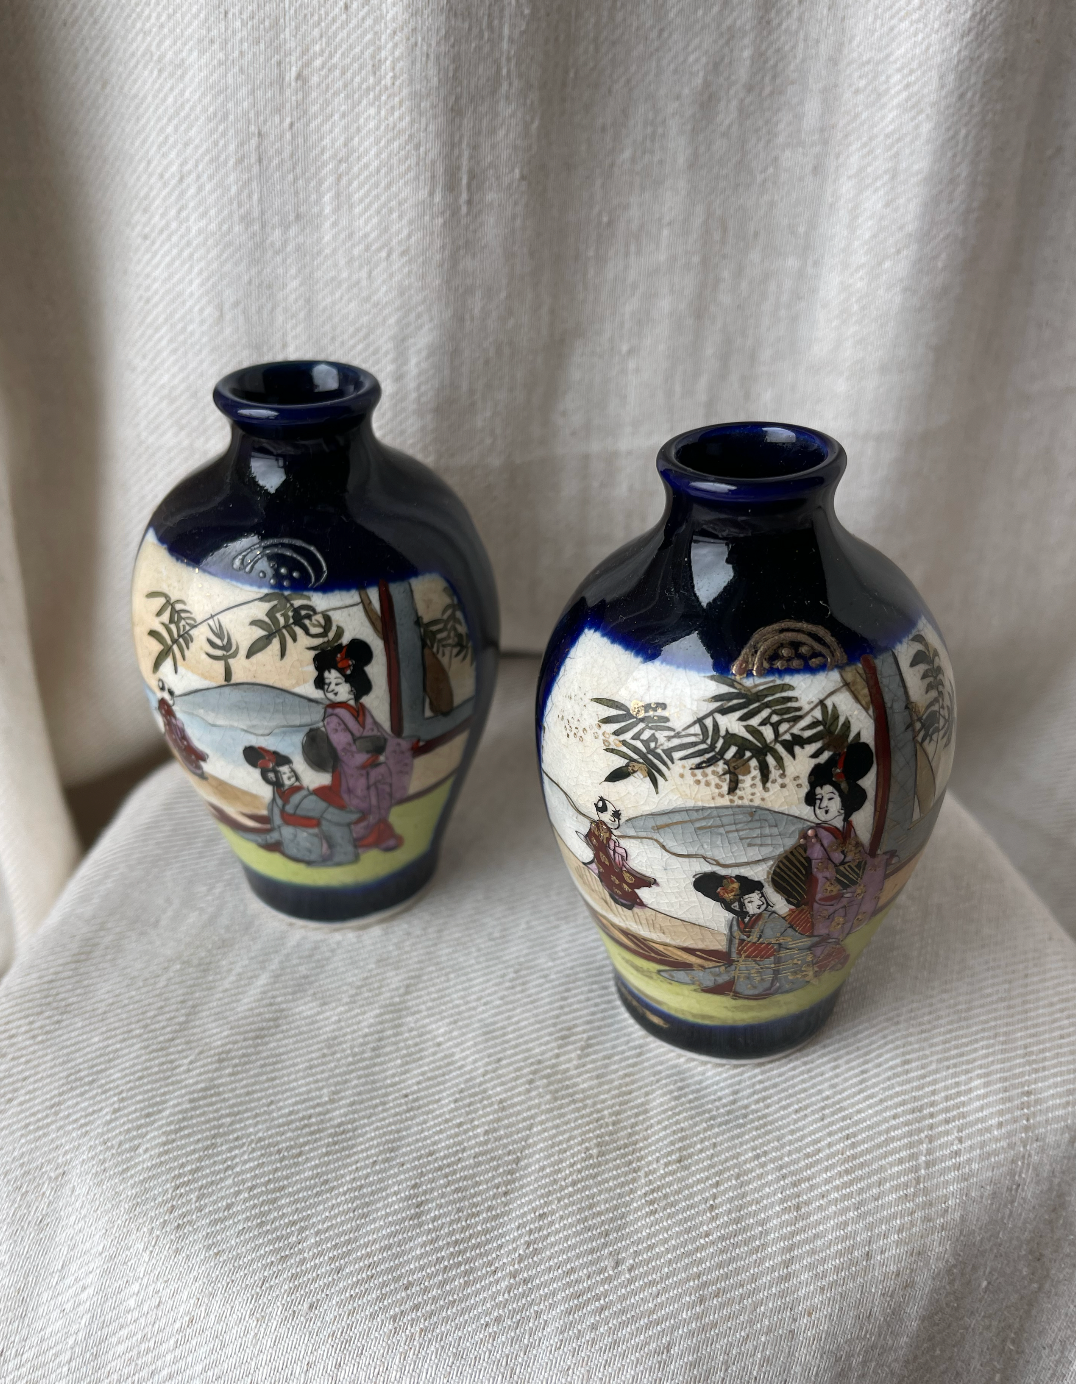 A pair of Japanese vases